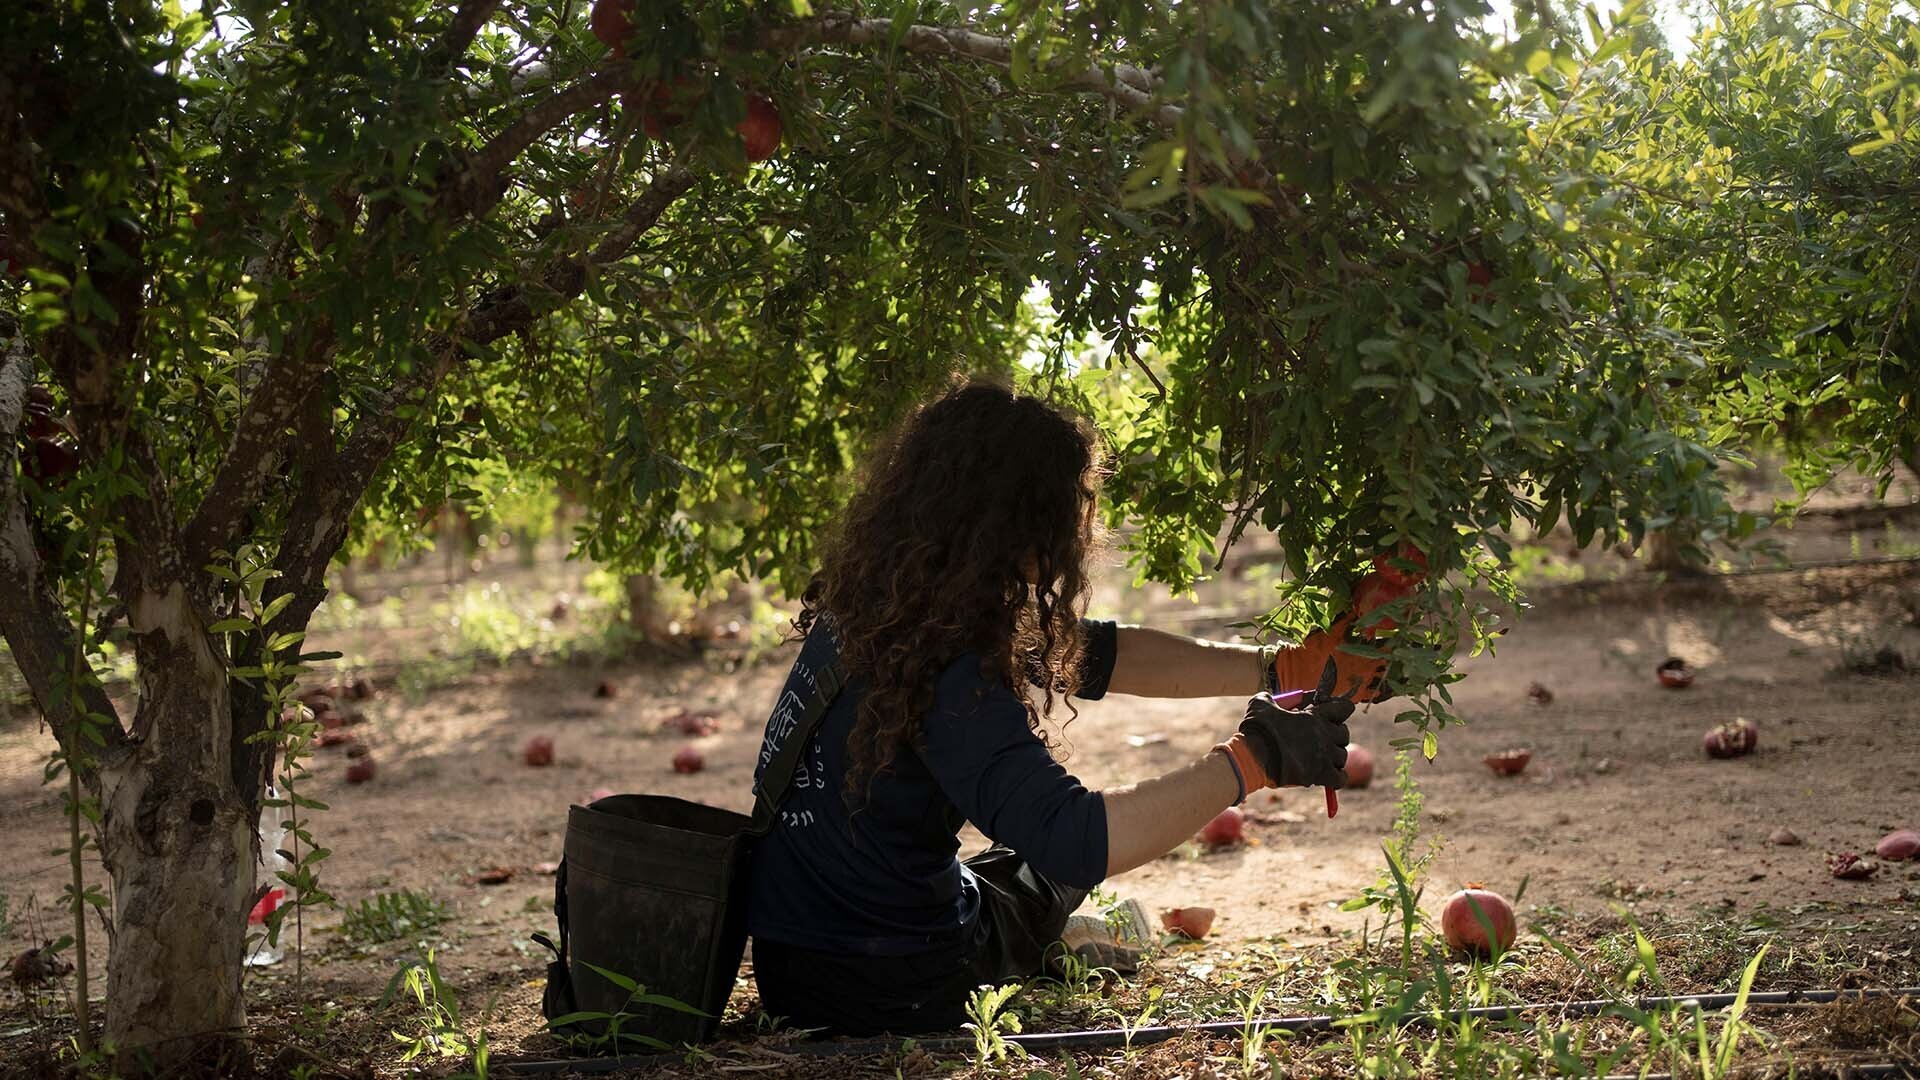 Can Israel’s agricultural sector recover after the war on Gaza? | Israel-Palestine conflict #Israels #agricultural #sector #recover #war #Gaza #IsraelPalestine #conflict